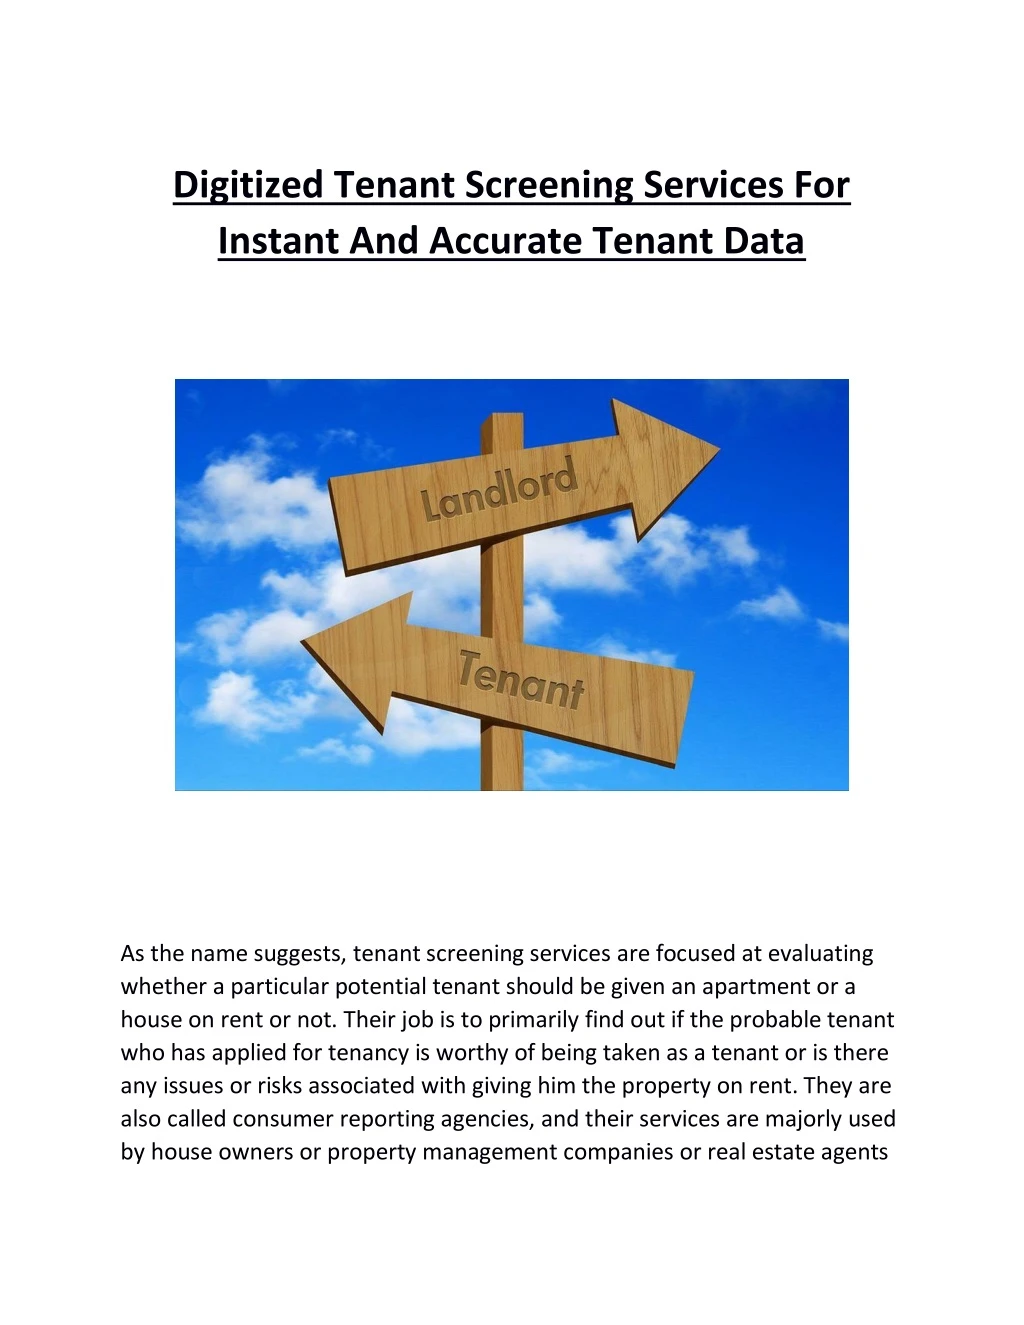 digitized tenant screening services for instant